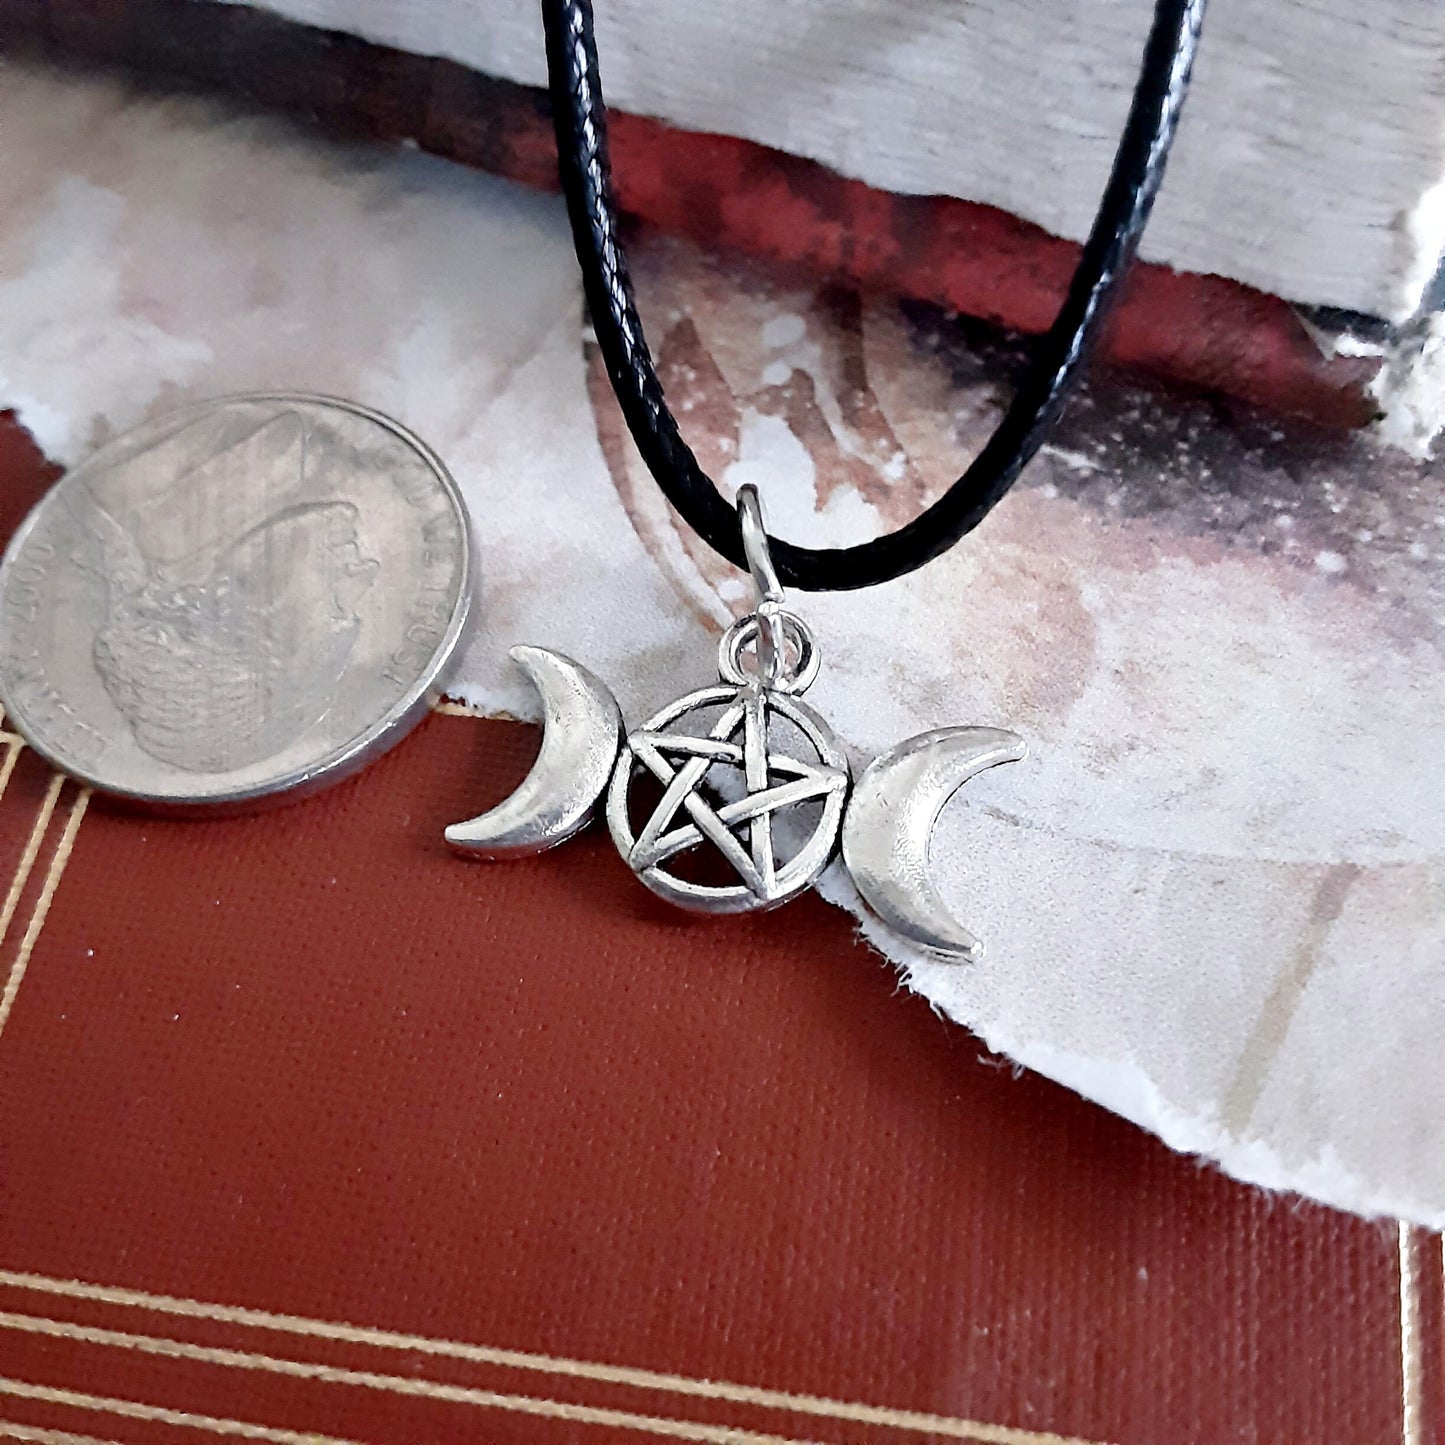 Hecate Necklace, Triple Moon Goddess Jewelry, Pentacle Crescent Moons, Everyday Witchcraft Daily Magic Amulet Pendant, Pagan Gift Idea